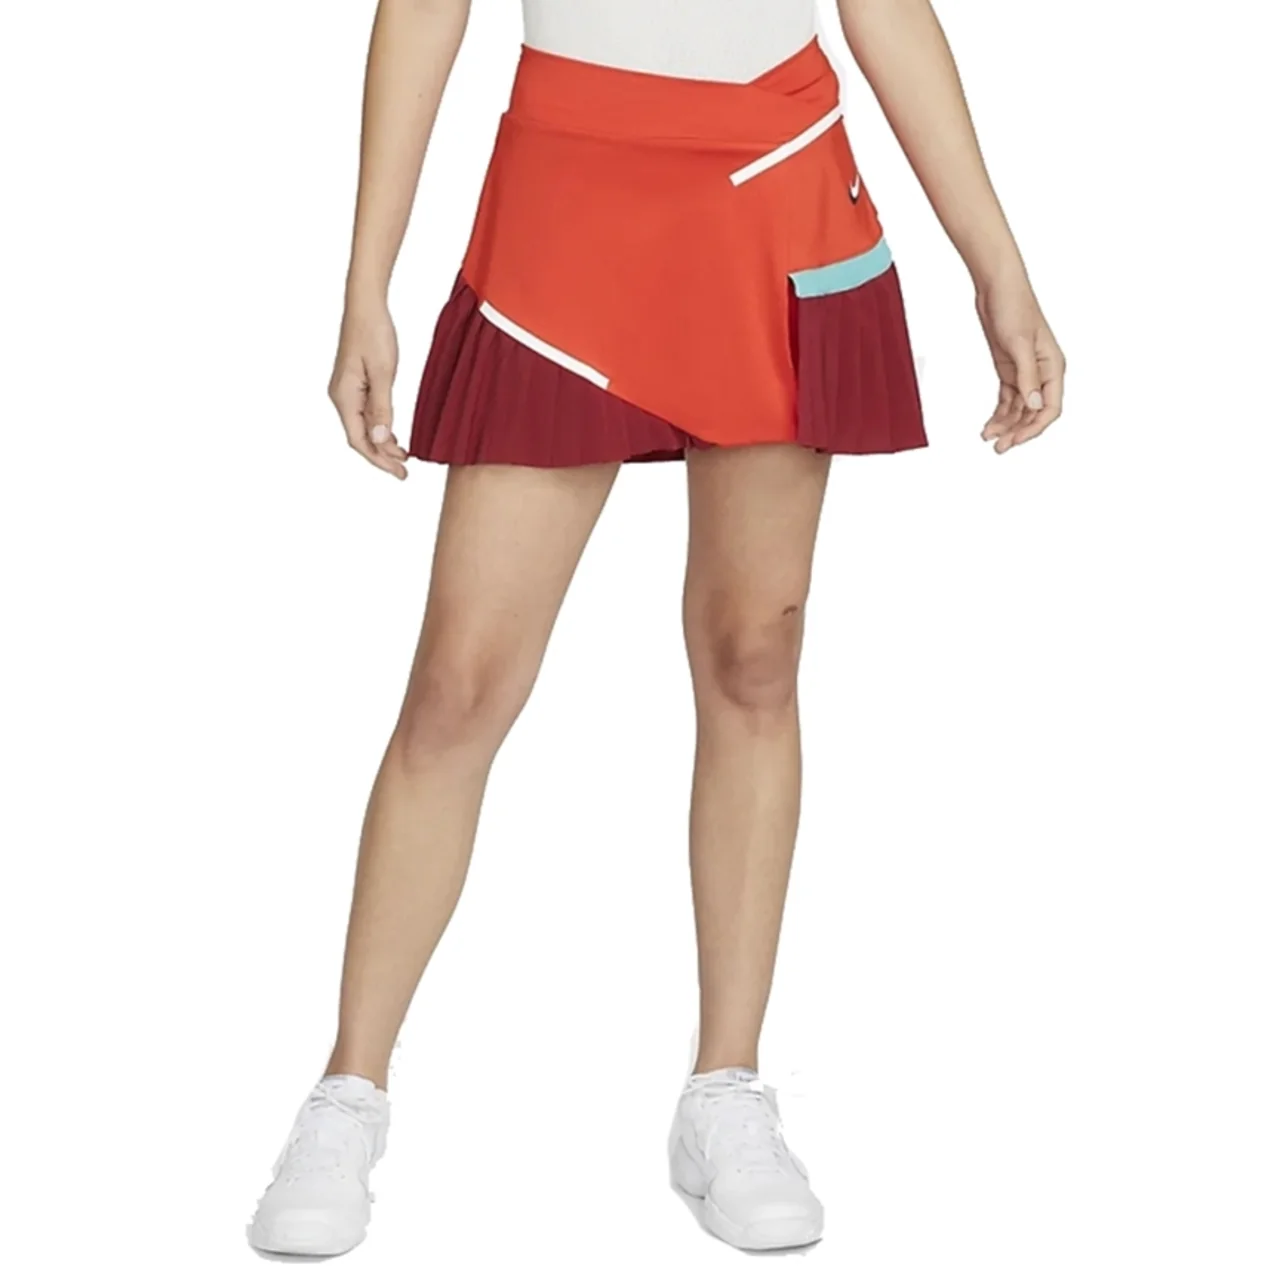 Nike Court Dri-FIT Skirt Habanero Red/Pomegranate/Washed Teal/White